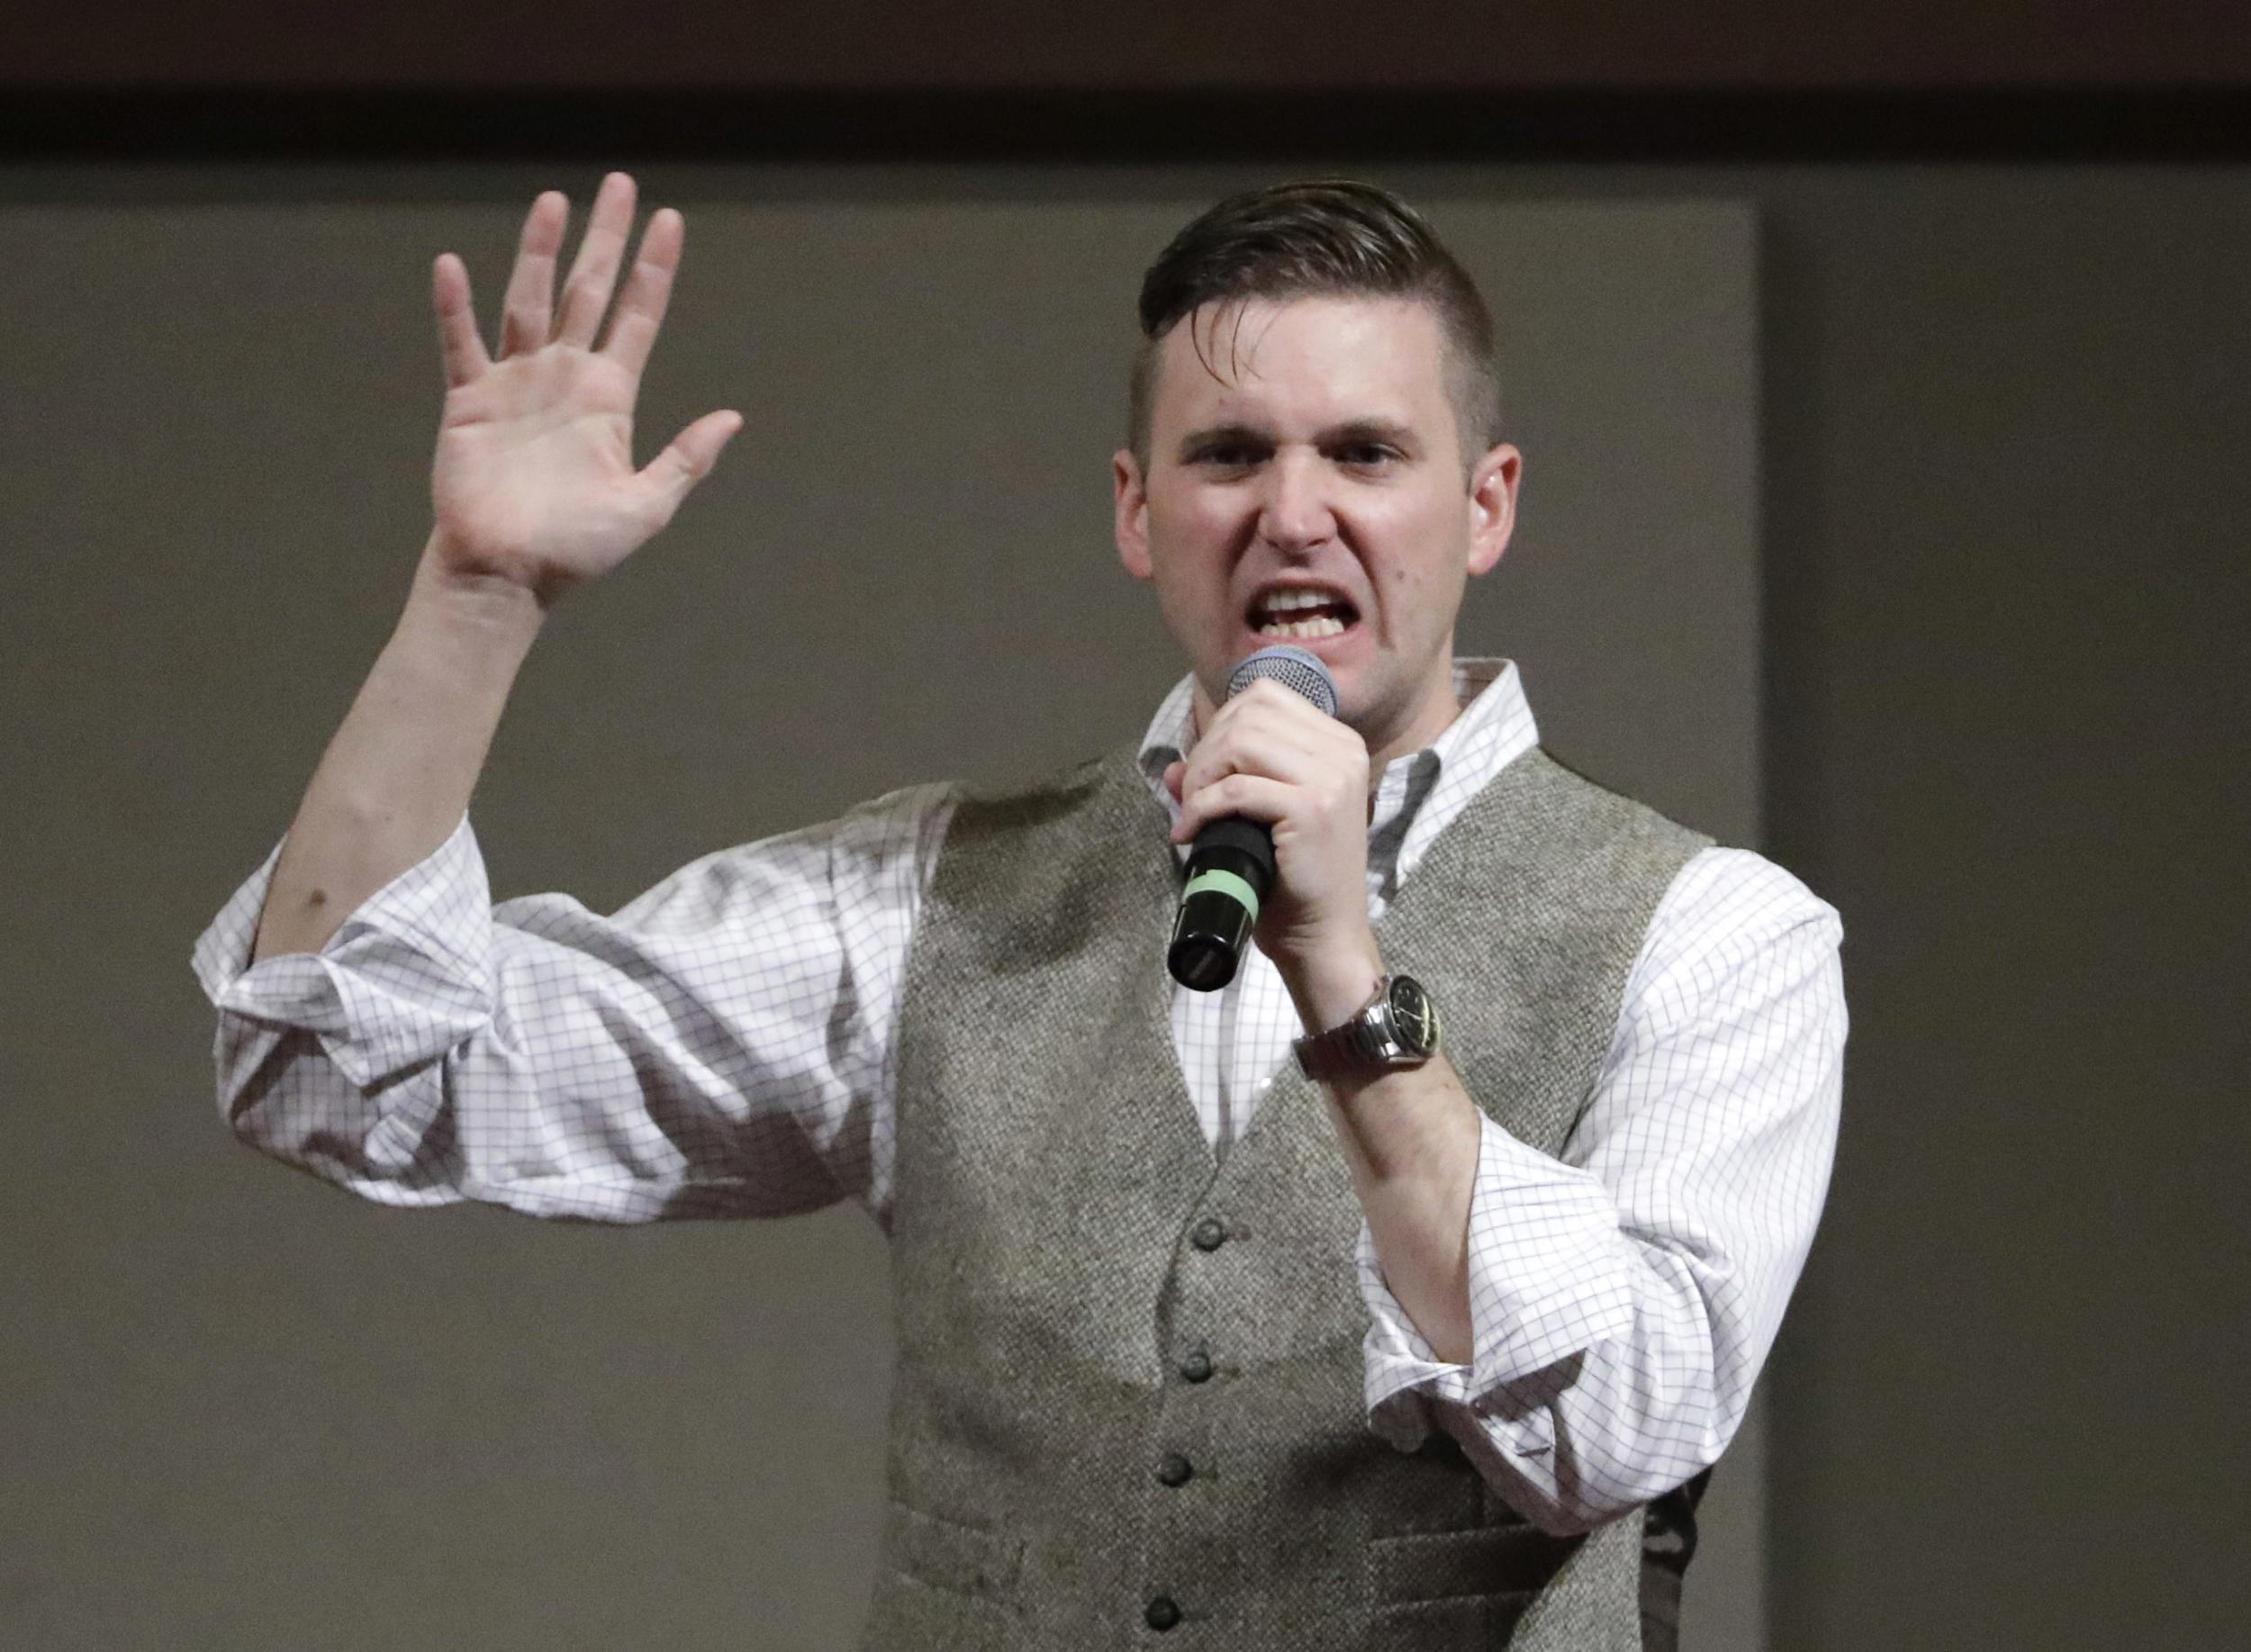 Richard Spencer discouraged the 'troll storm' in the town but made no direct call to Andrew Anglin to stop the march